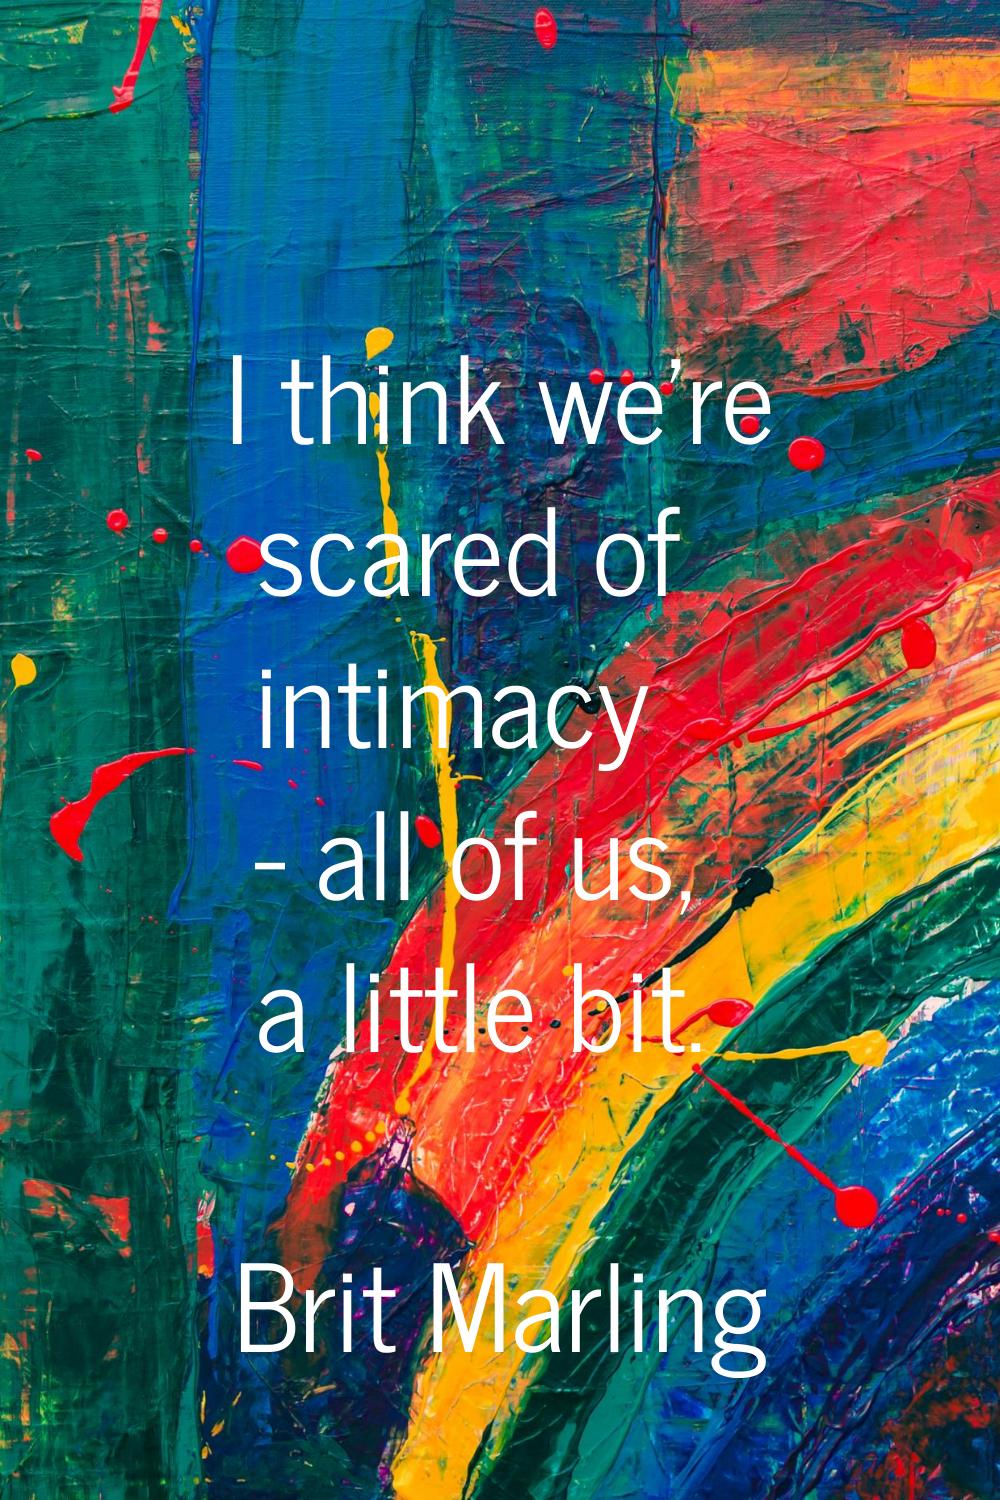 I think we're scared of intimacy - all of us, a little bit.